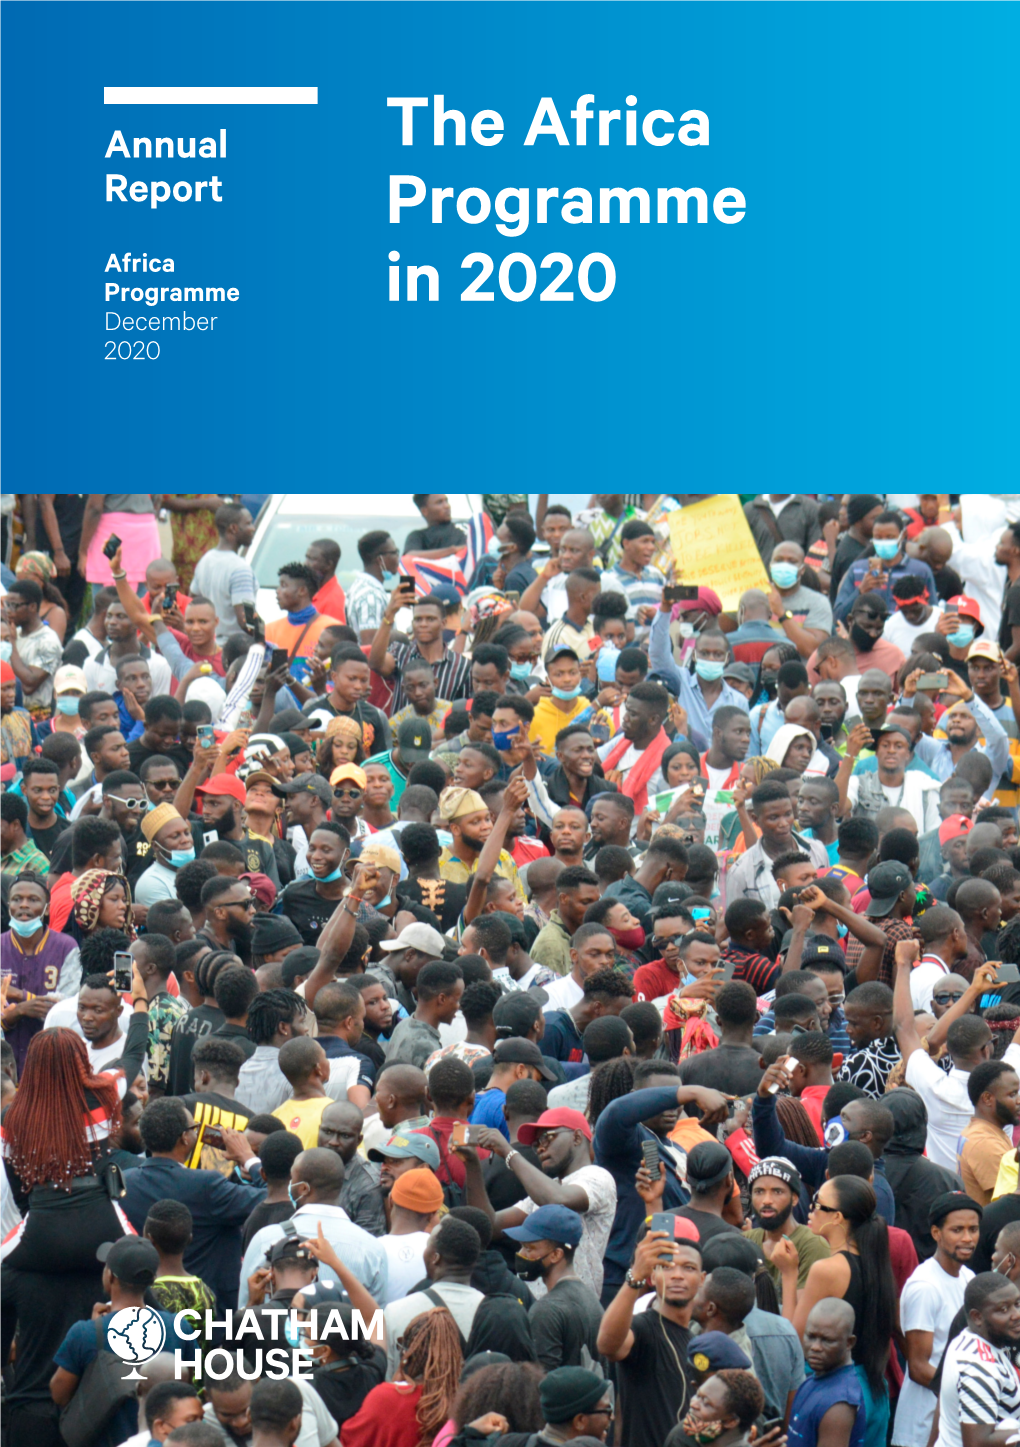 Annual Report: the Africa Programme in 2020